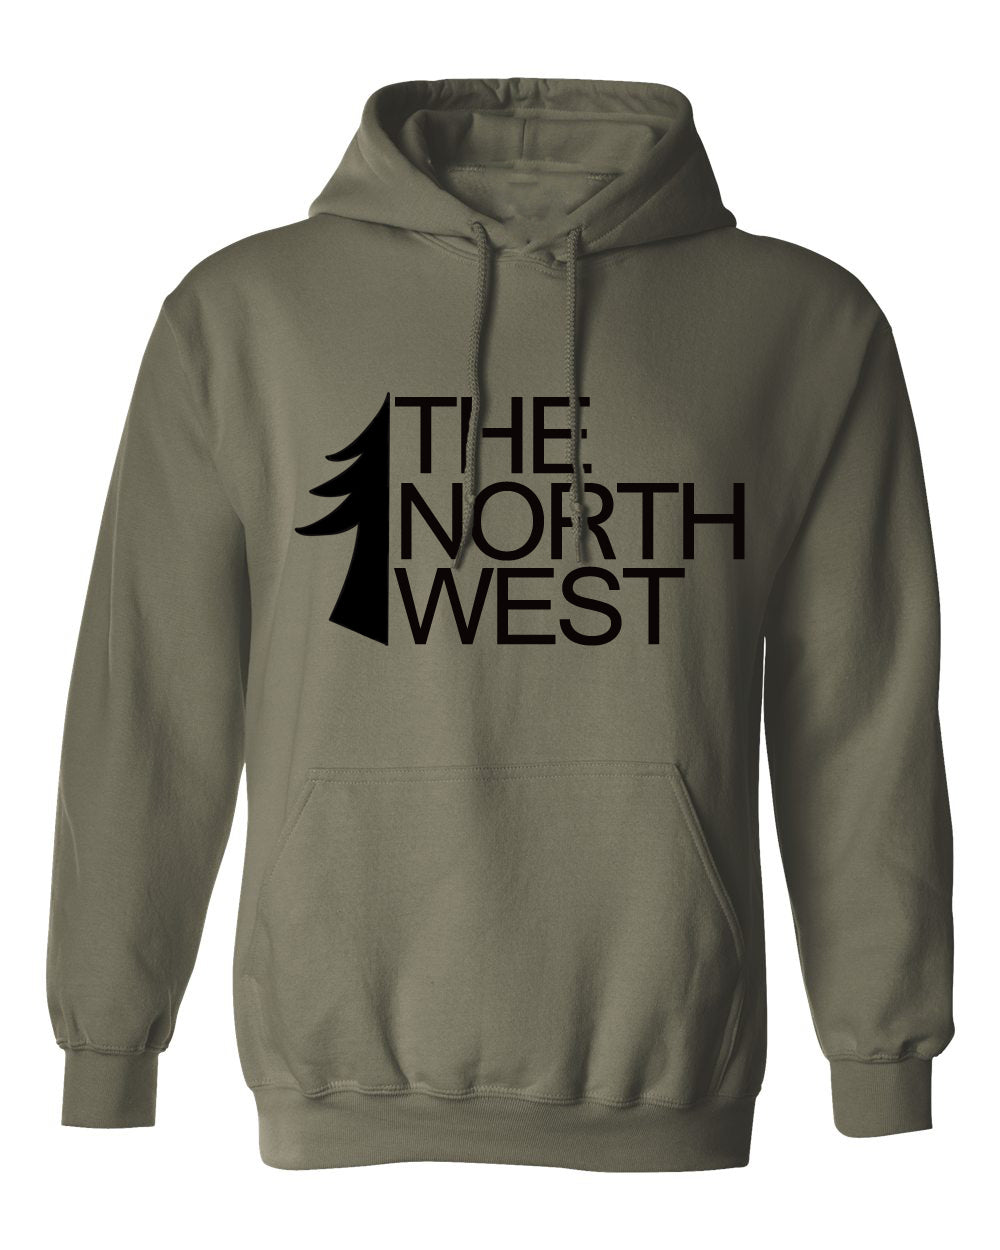 The North West Half Tree Hoodie in Military Green (options available)